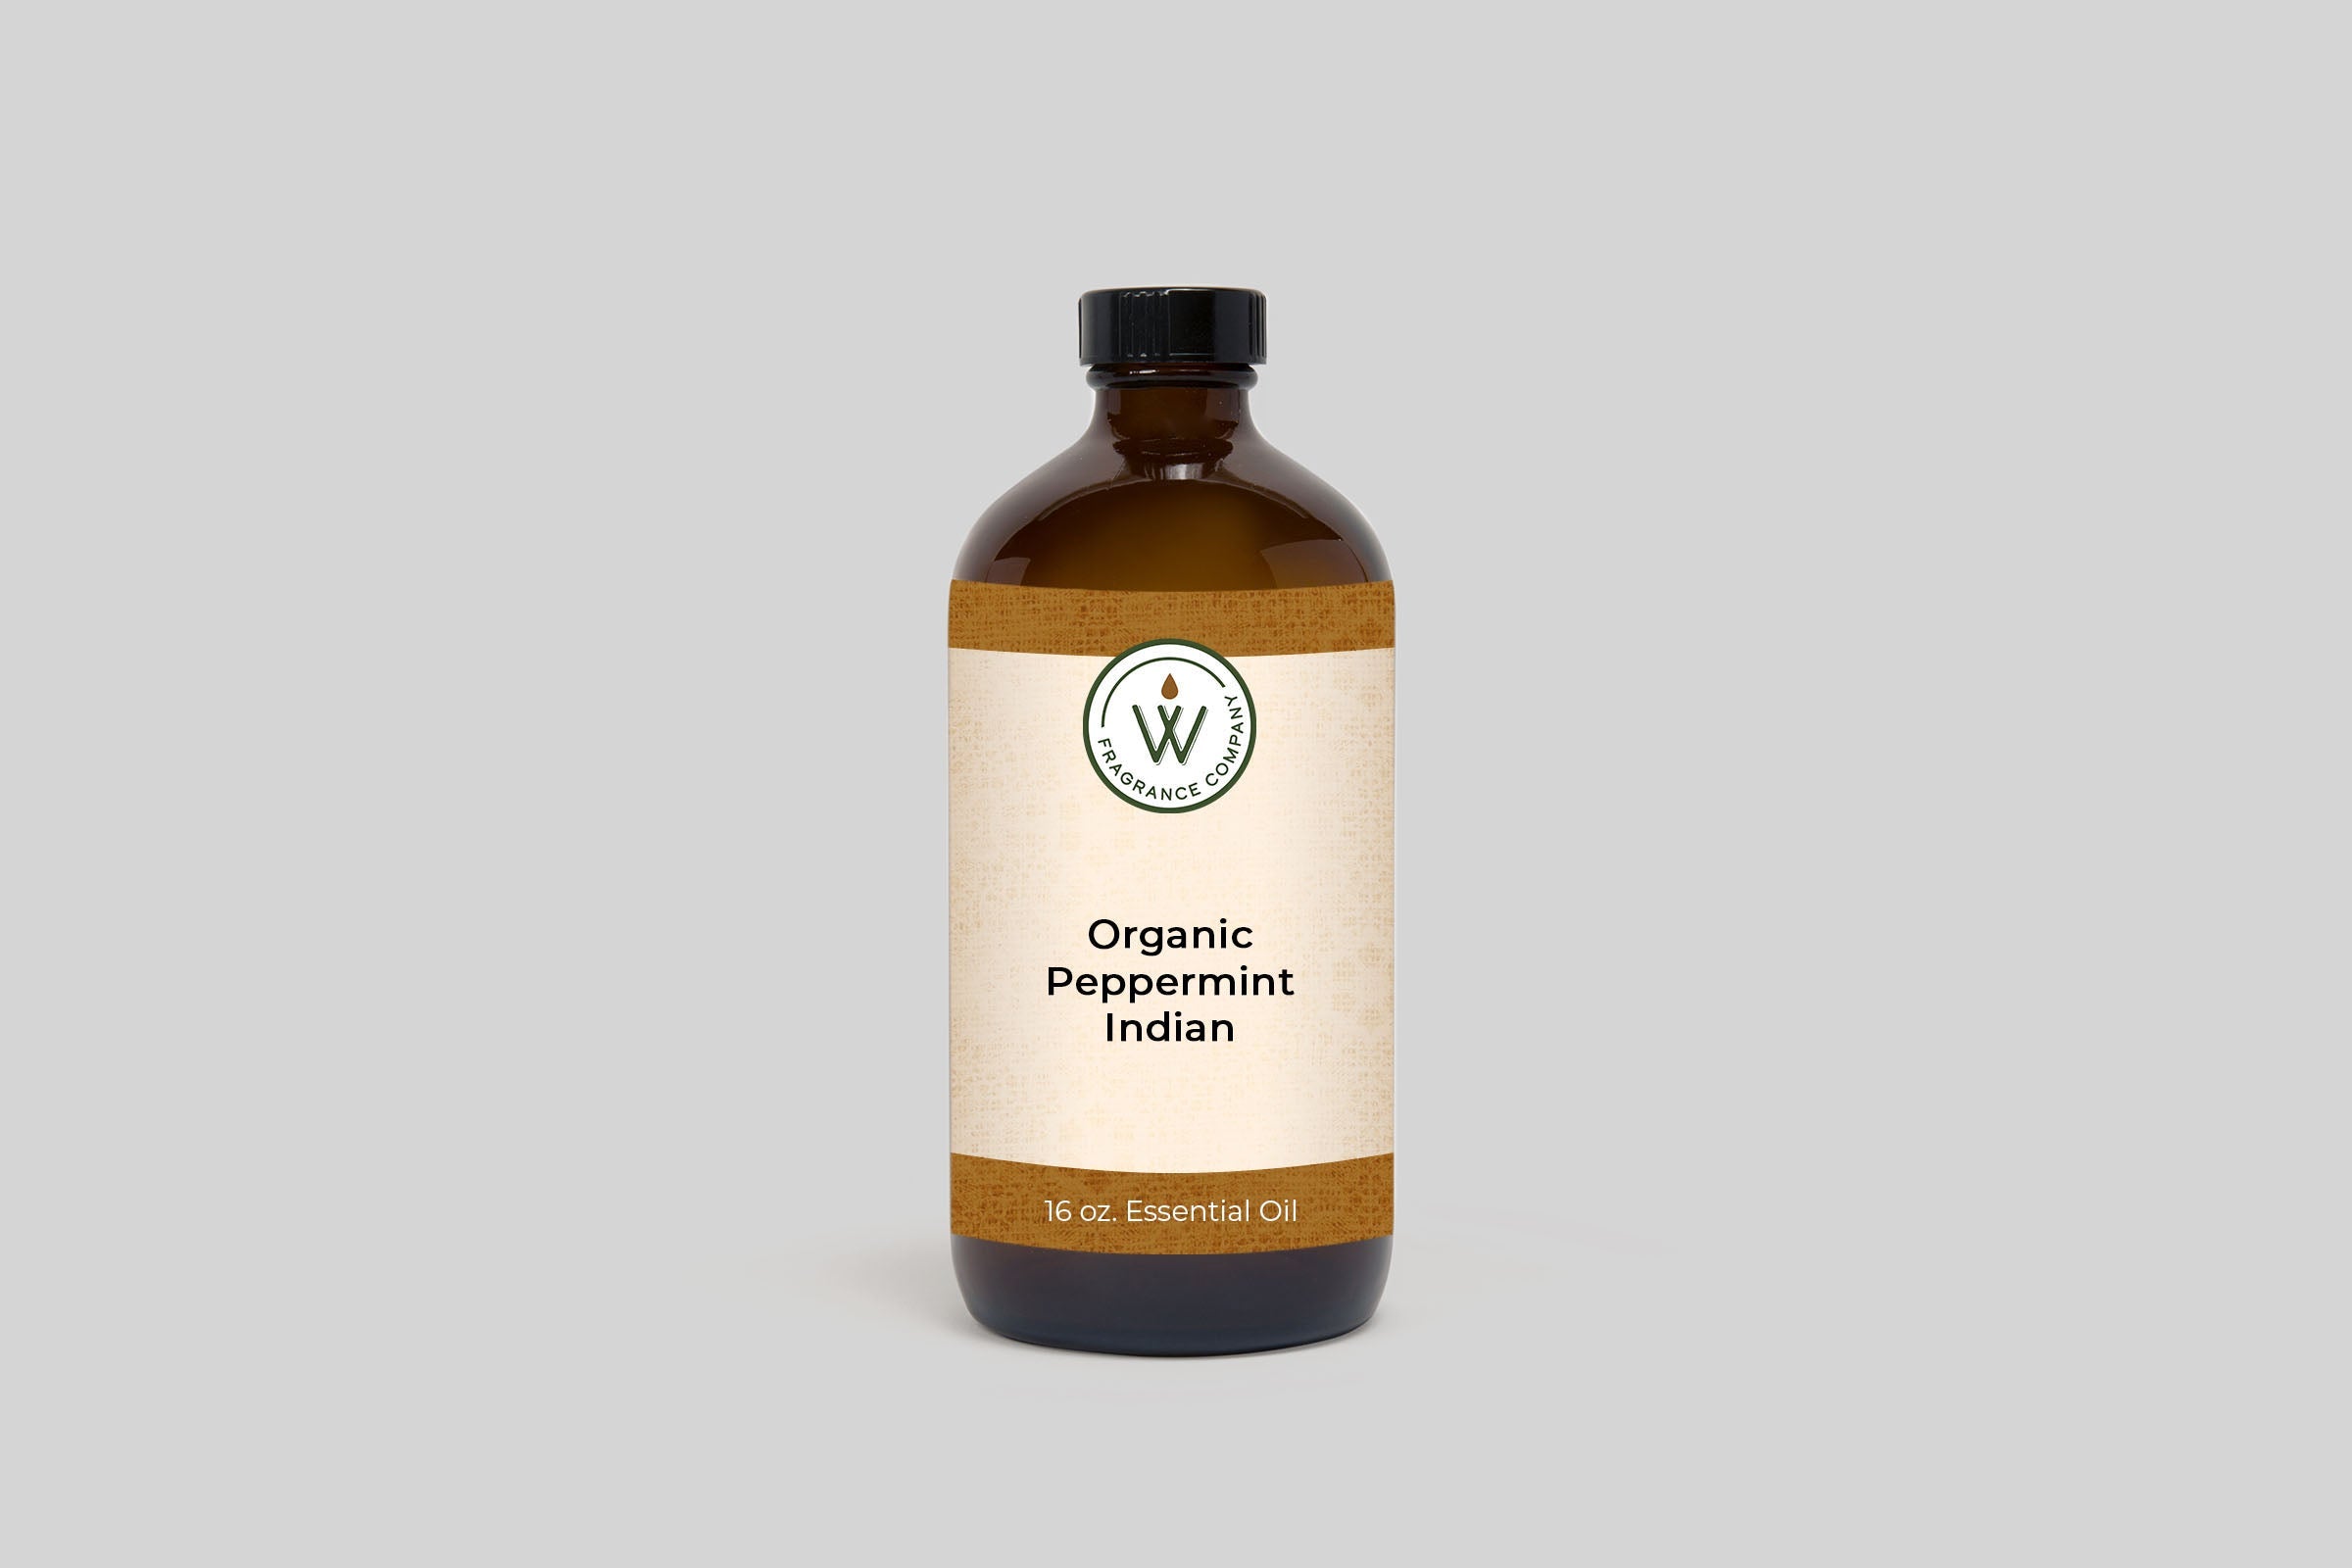 Organic Peppermint Indian Essential Oil